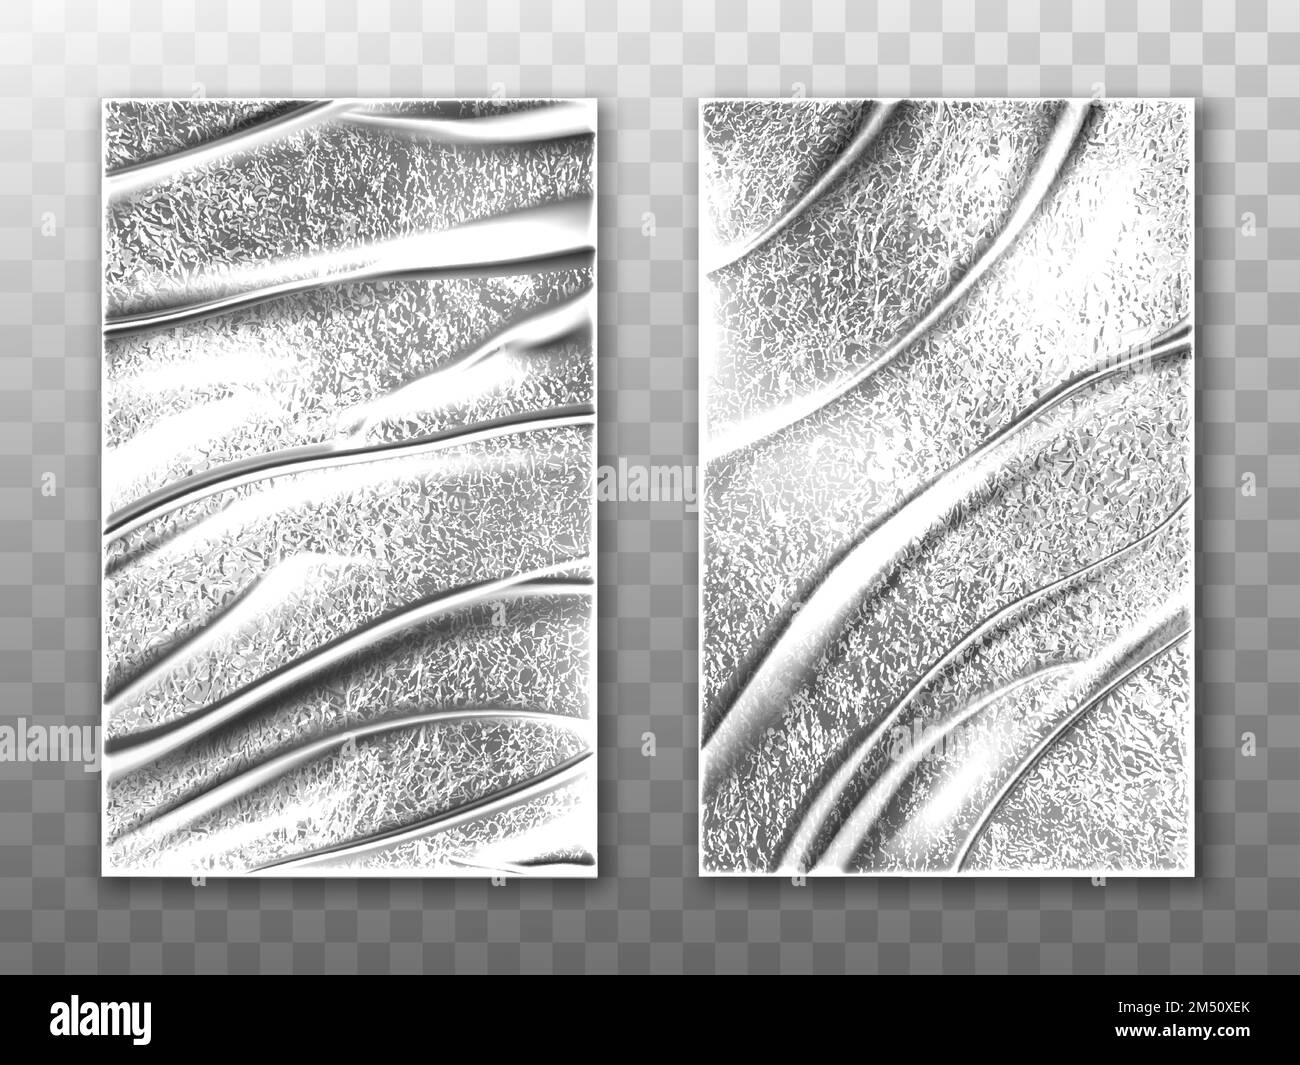 Silver texture fabric pattern light realistic sh Vector Image